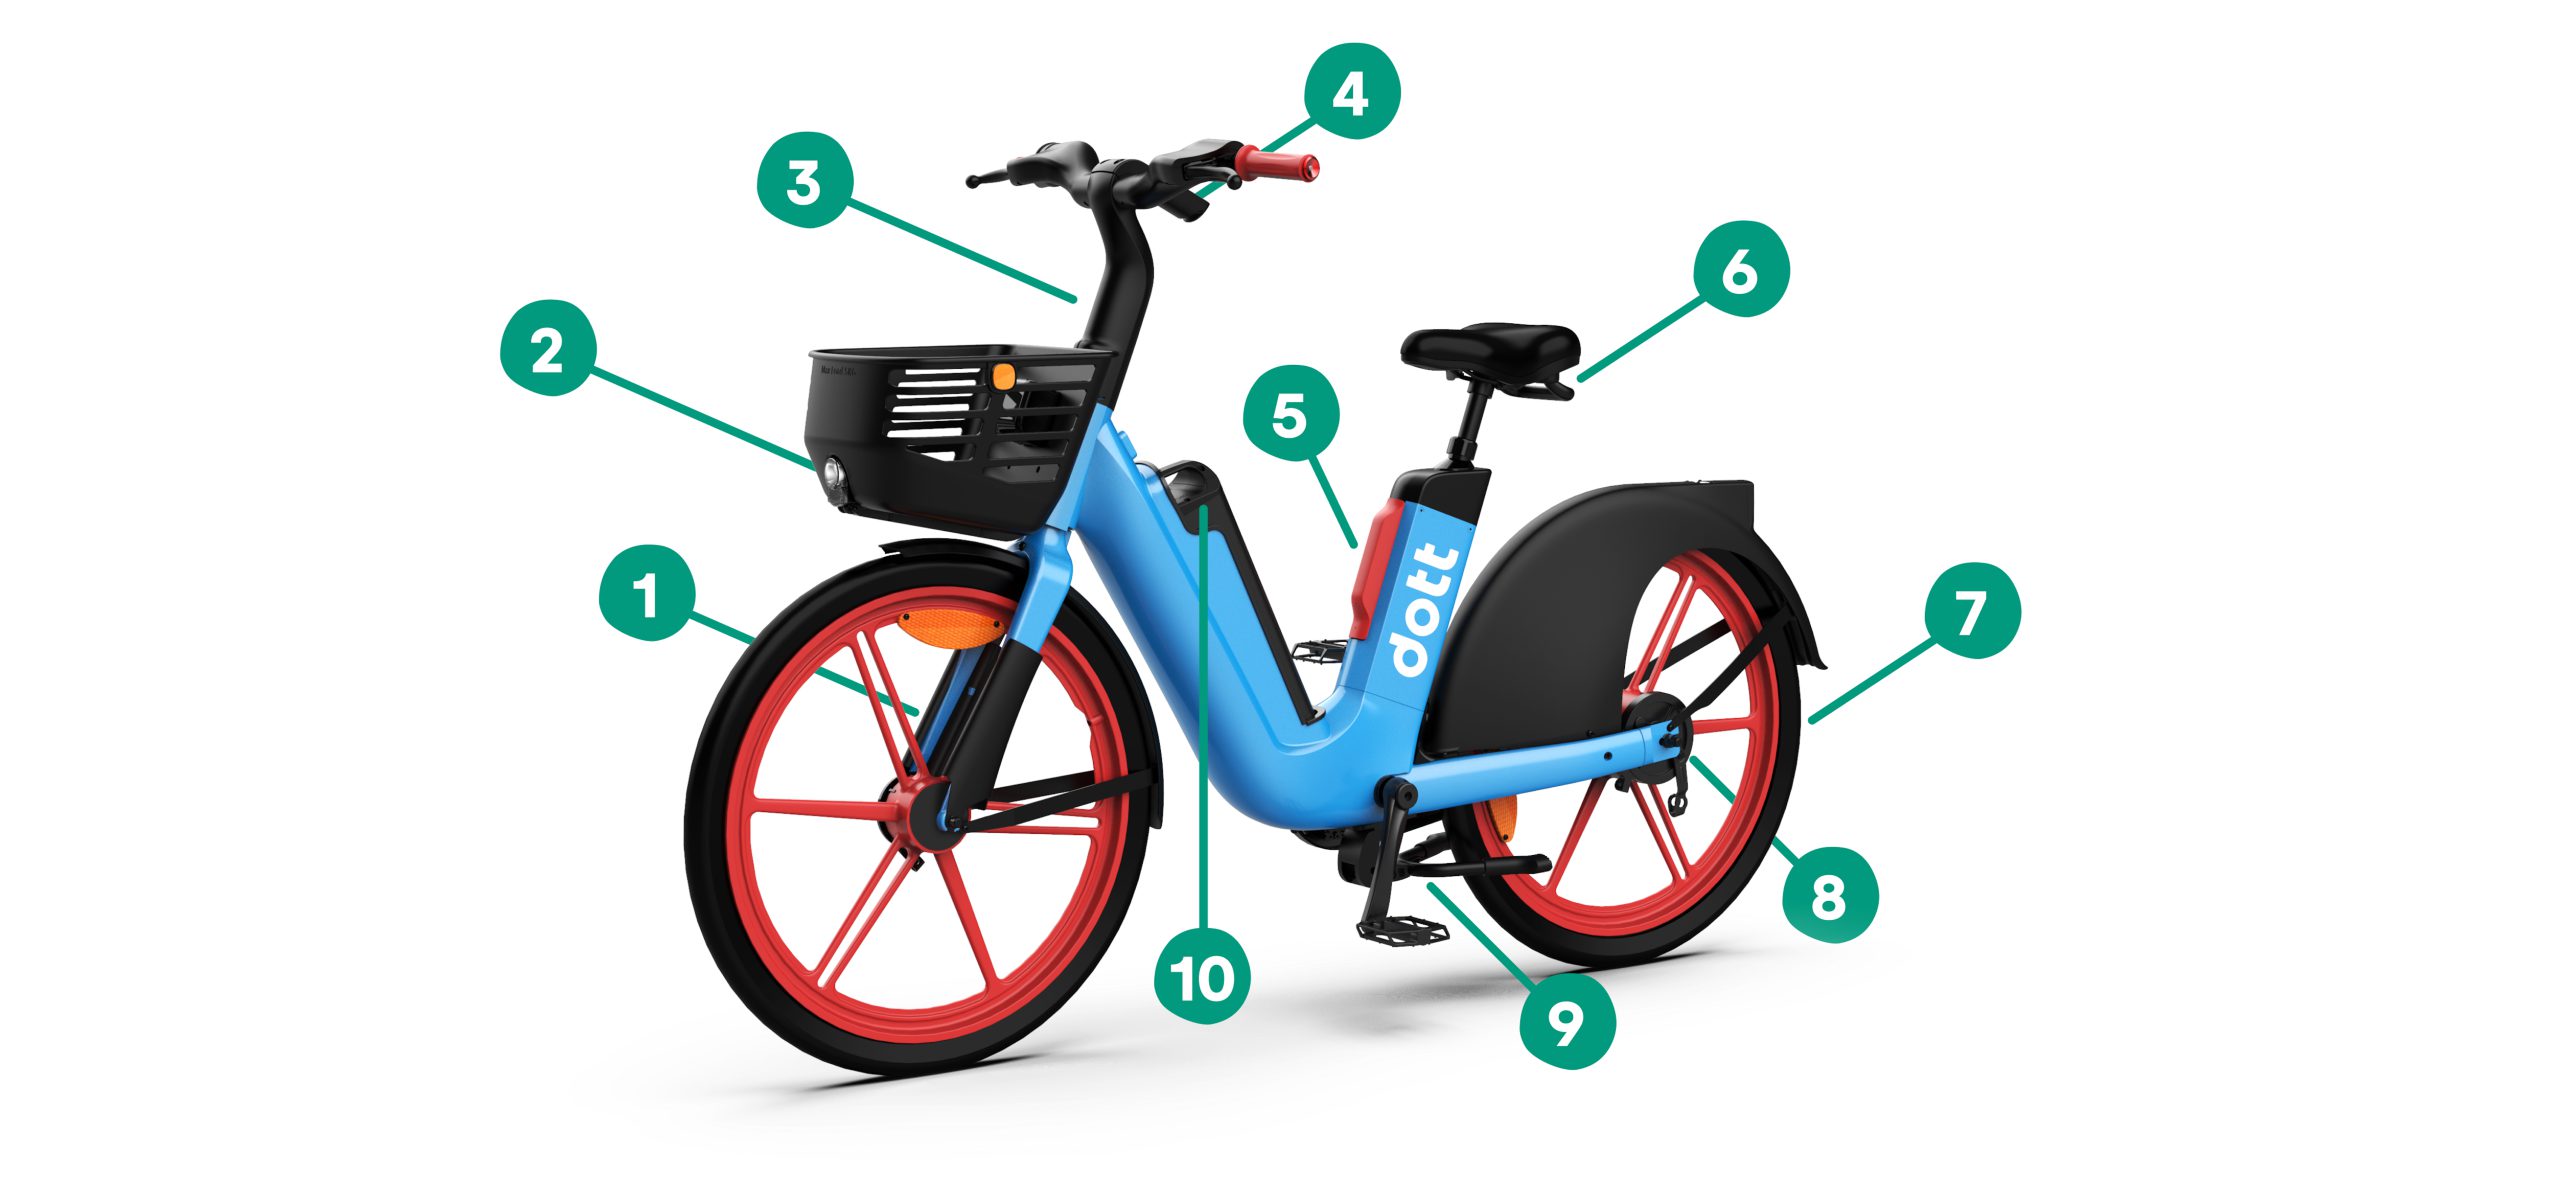 A photograph of the blue Dott e-bike with green arrows pointing to each hardware spec on the bike, with an explanation of each piece below.